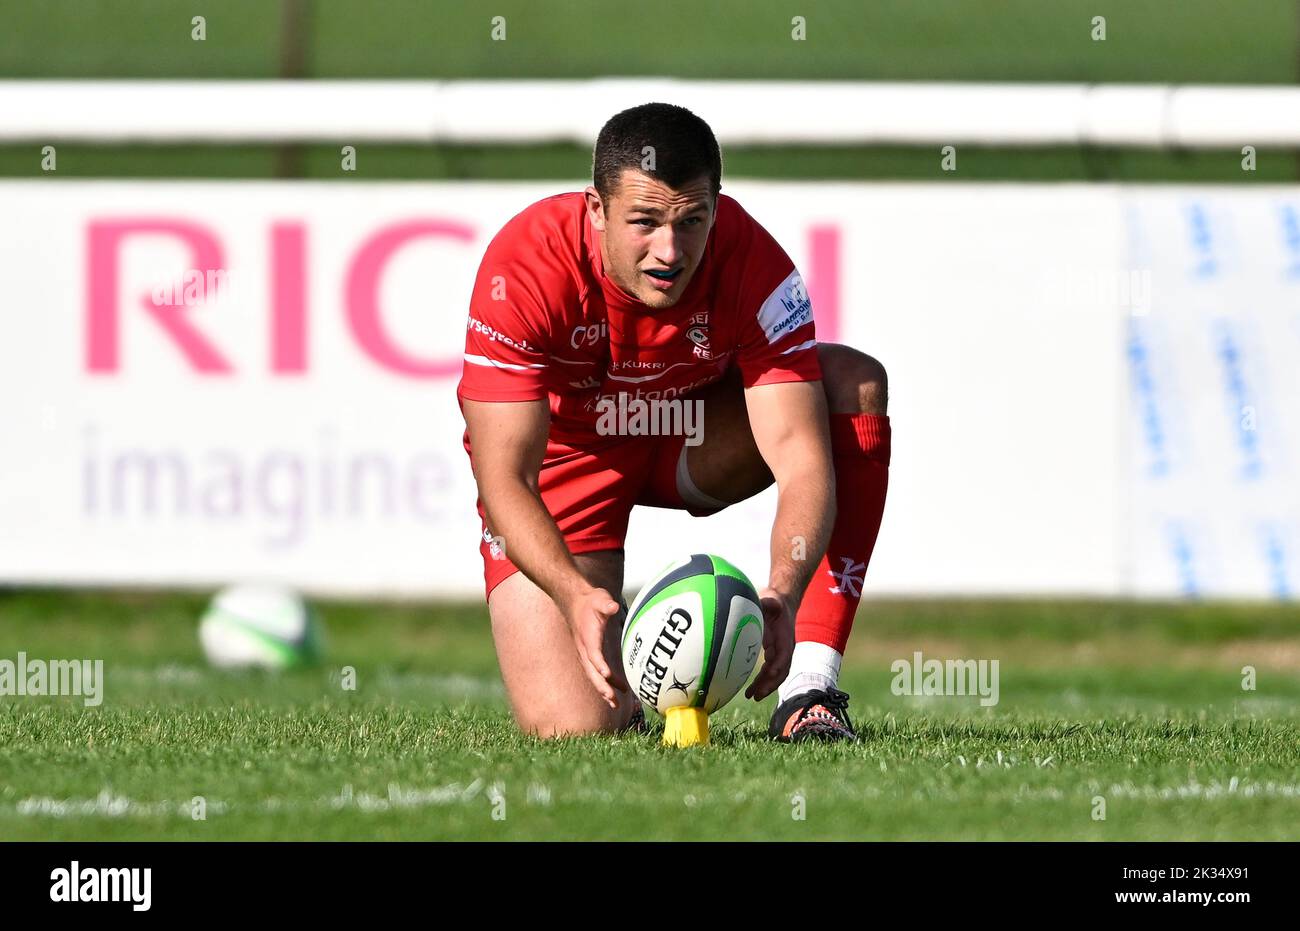 Richmond, United Kingdom. 24th Sep, 2022. Championship Rugby. London Scottish V Jersey Reds. The Richmond Athletic Ground. Richmond. Russell Bennett (Jersey Reds) prepares to kick during the London Scottish V Jersey Reds championship rugby match. Credit: Sport In Pictures/Alamy Live News Stock Photo